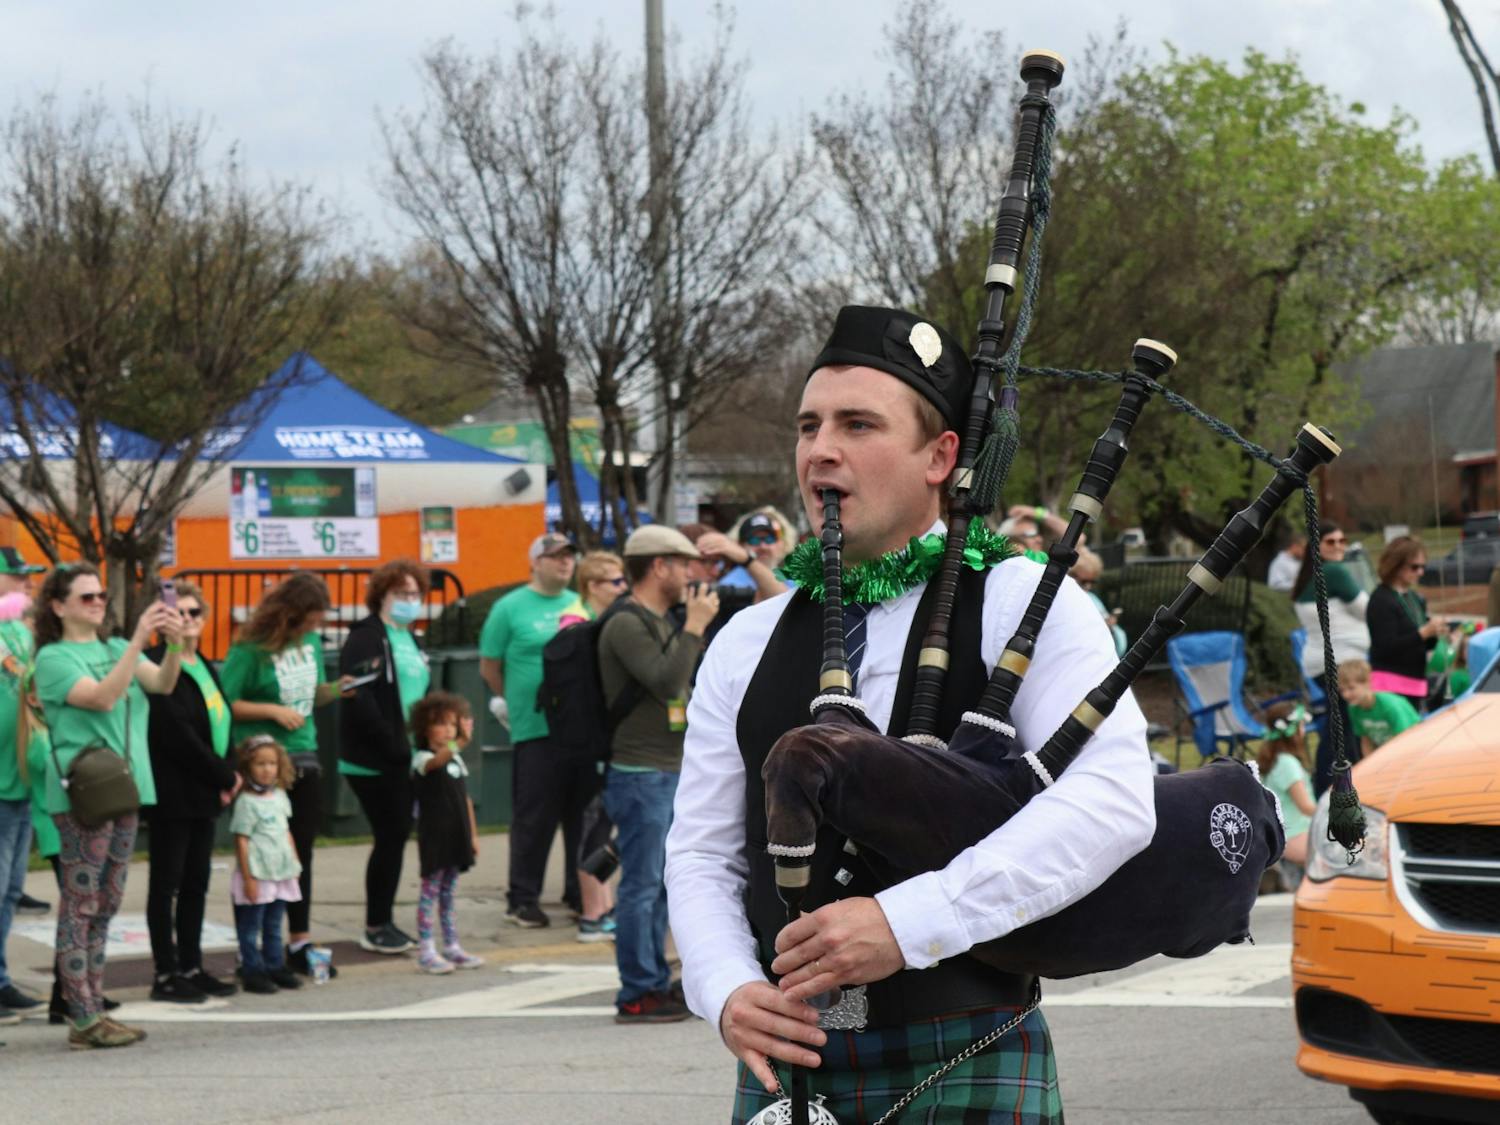 A bagpiper plays the bagpipes in the 40th Annual St. Pats in 5 Points Parade on March 19, 2022.